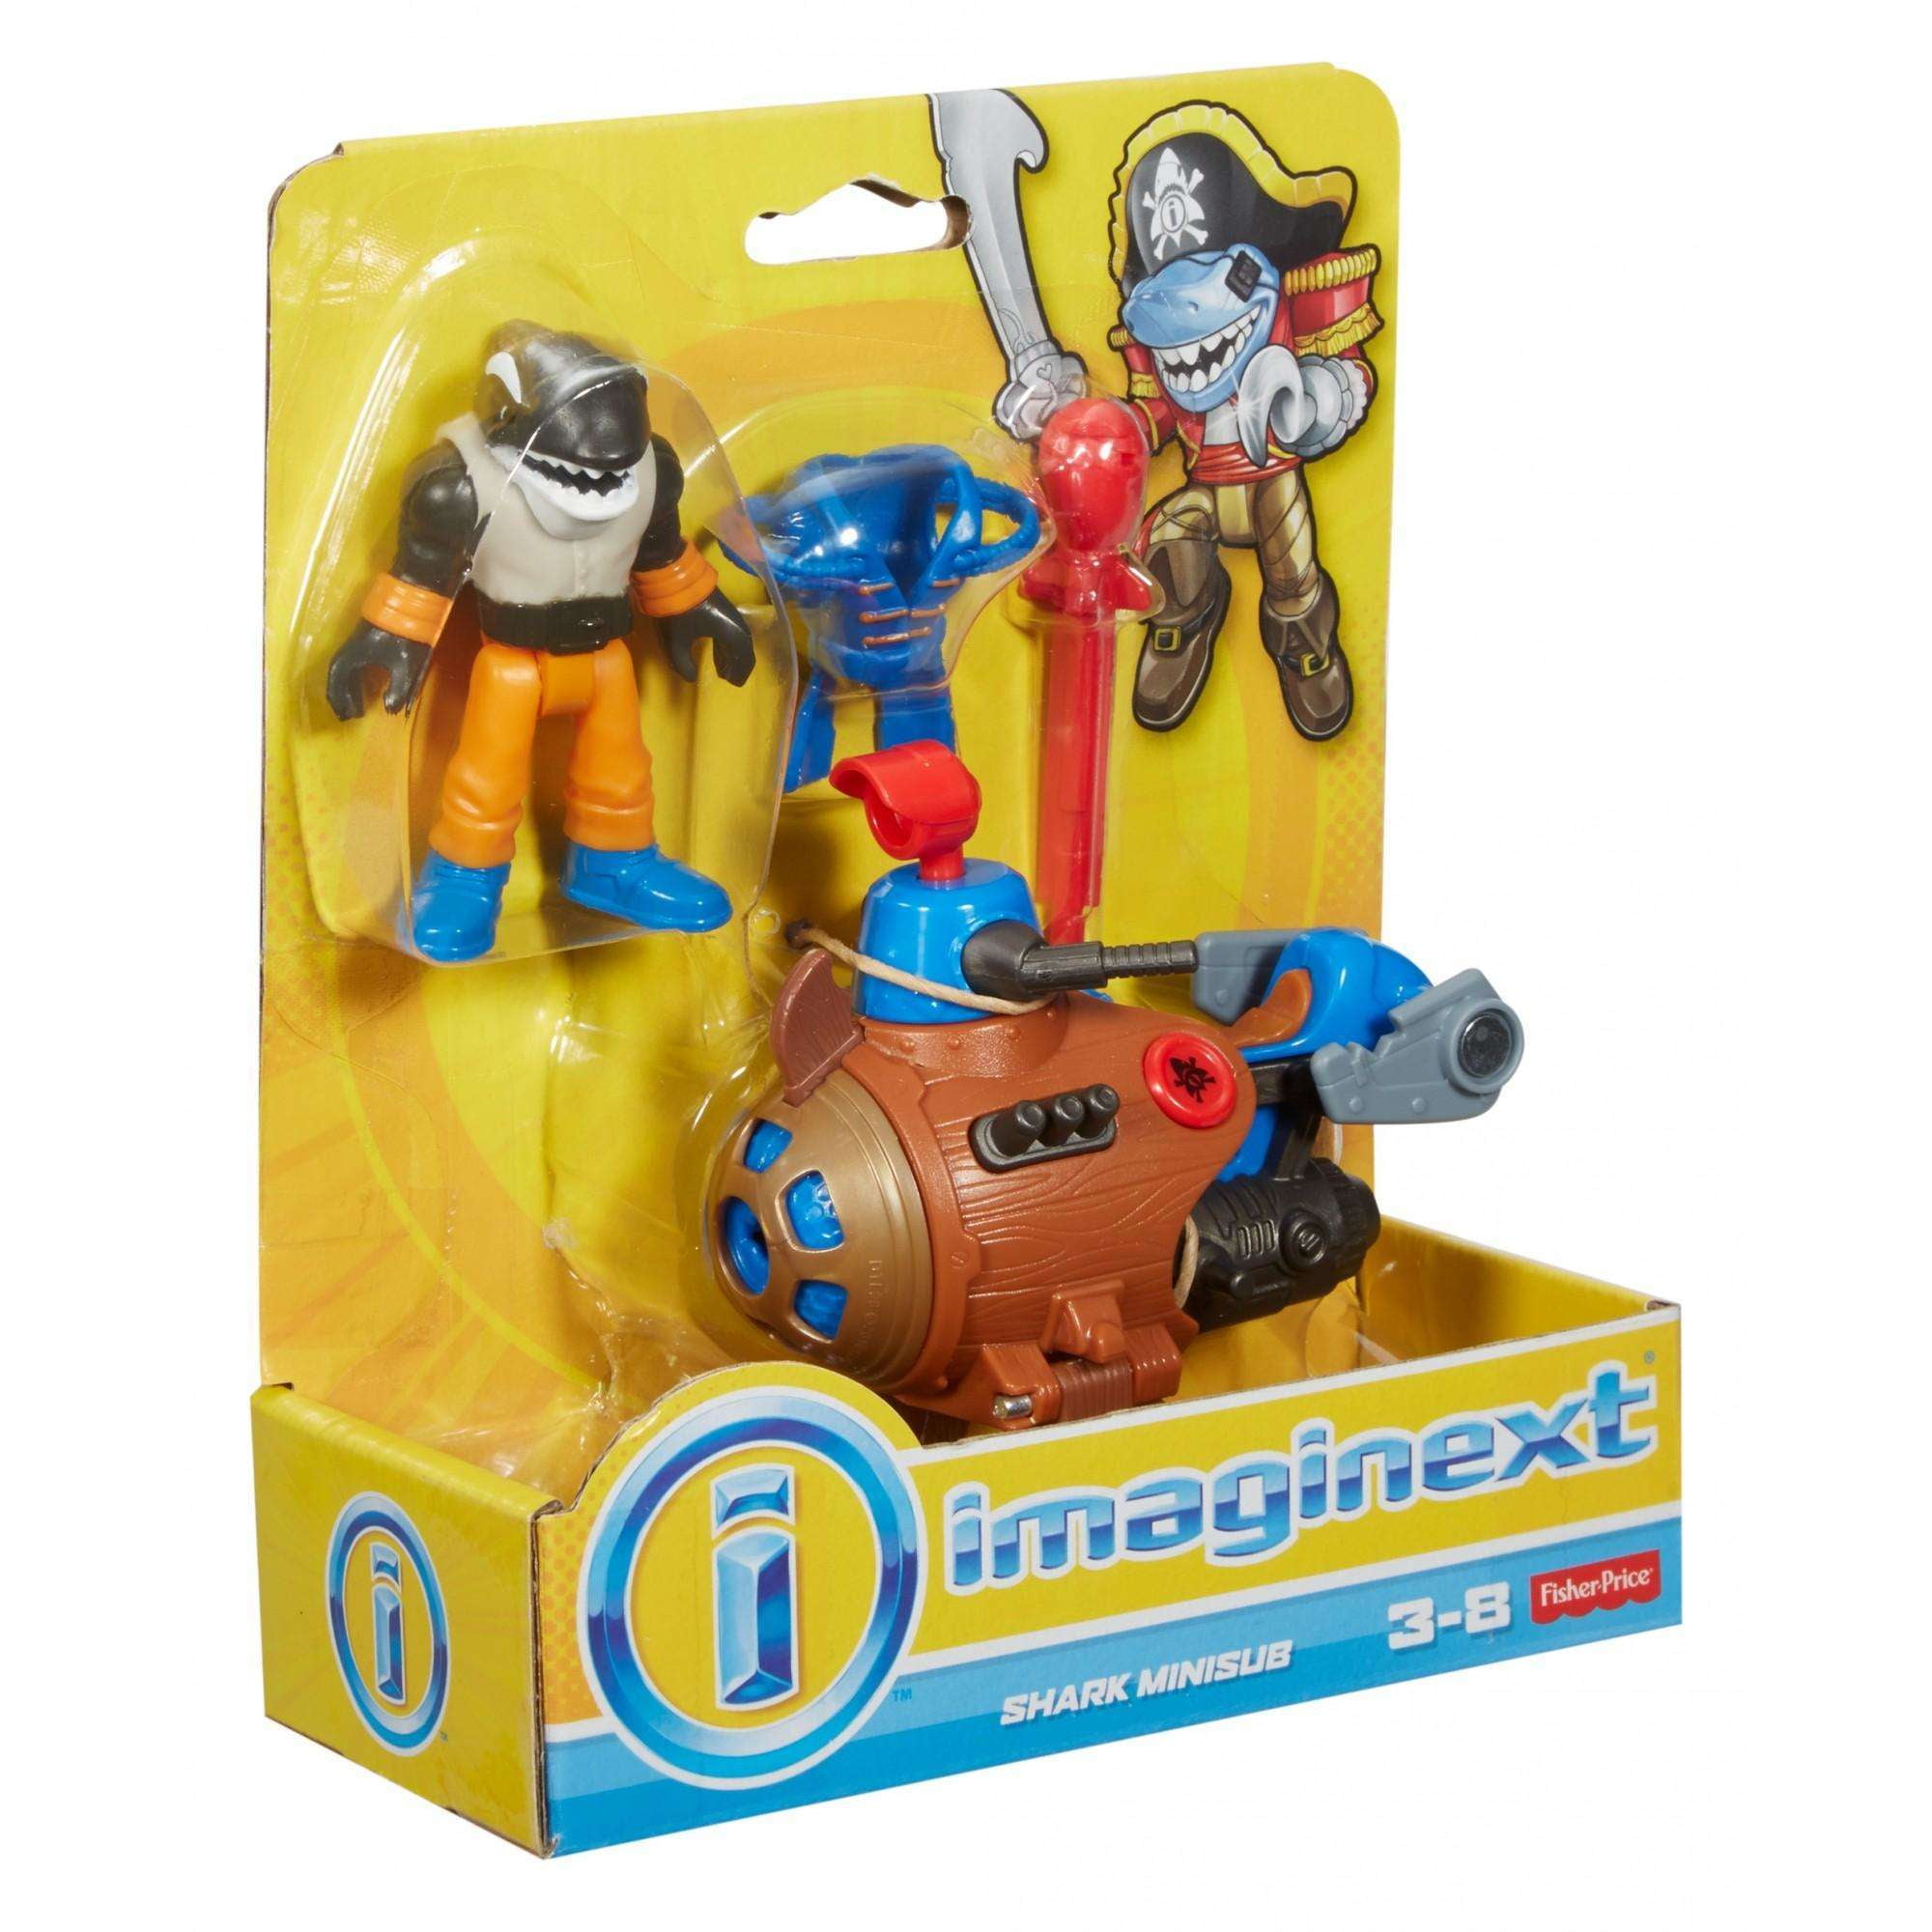 rare Imaginext Shark Minisub Fisher-Price action figure collection toy 